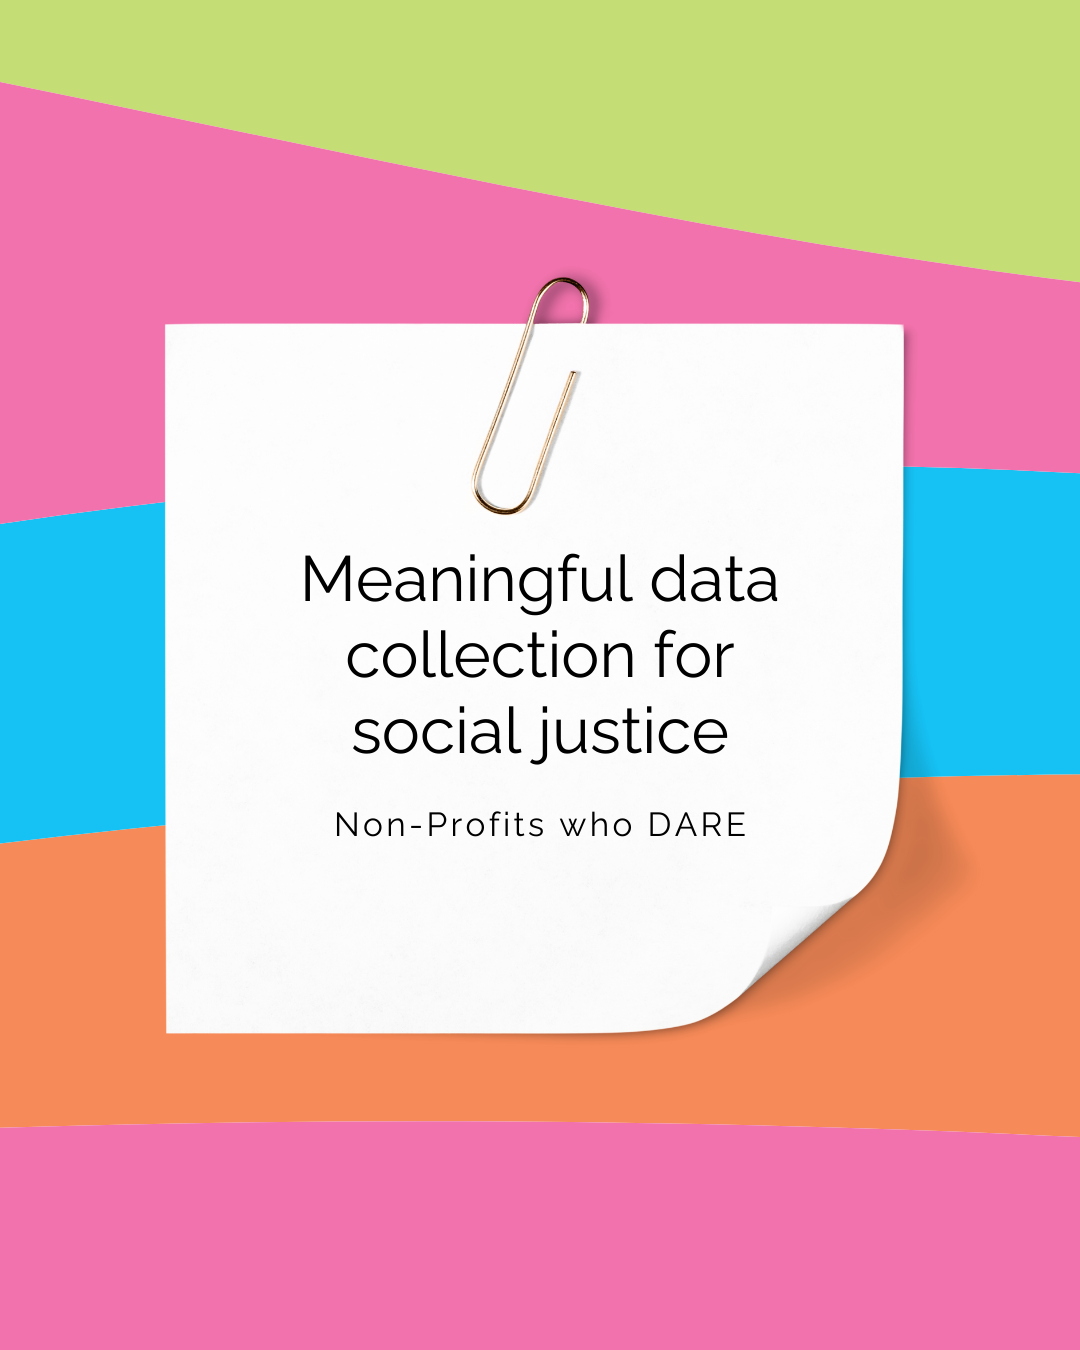 Meaningful data collection for social justice